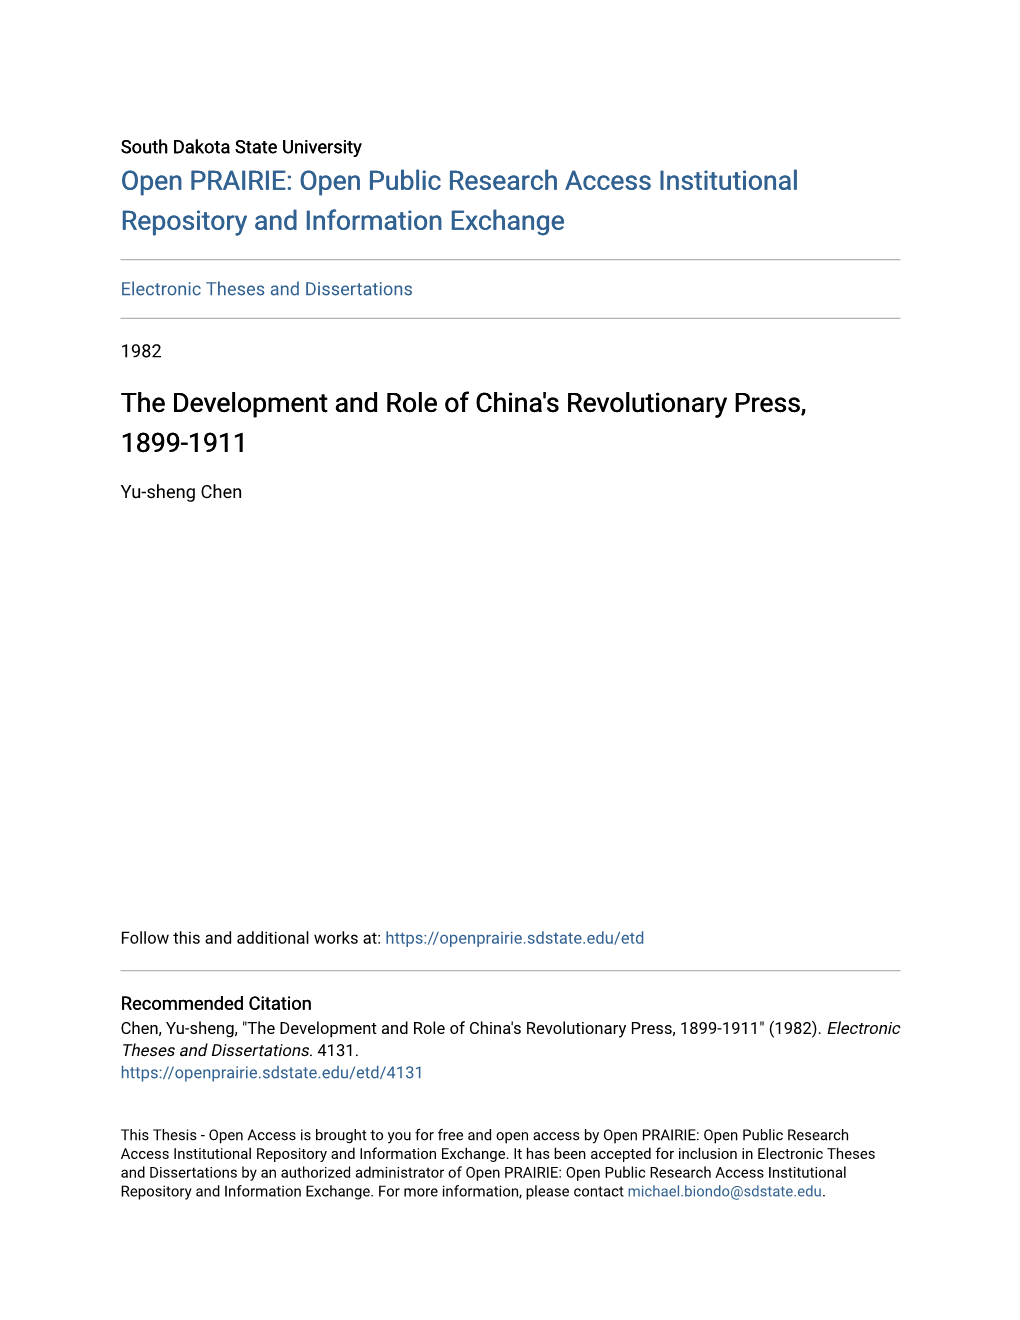 The Development and Role of China's Revolutionary Press, 1899-1911